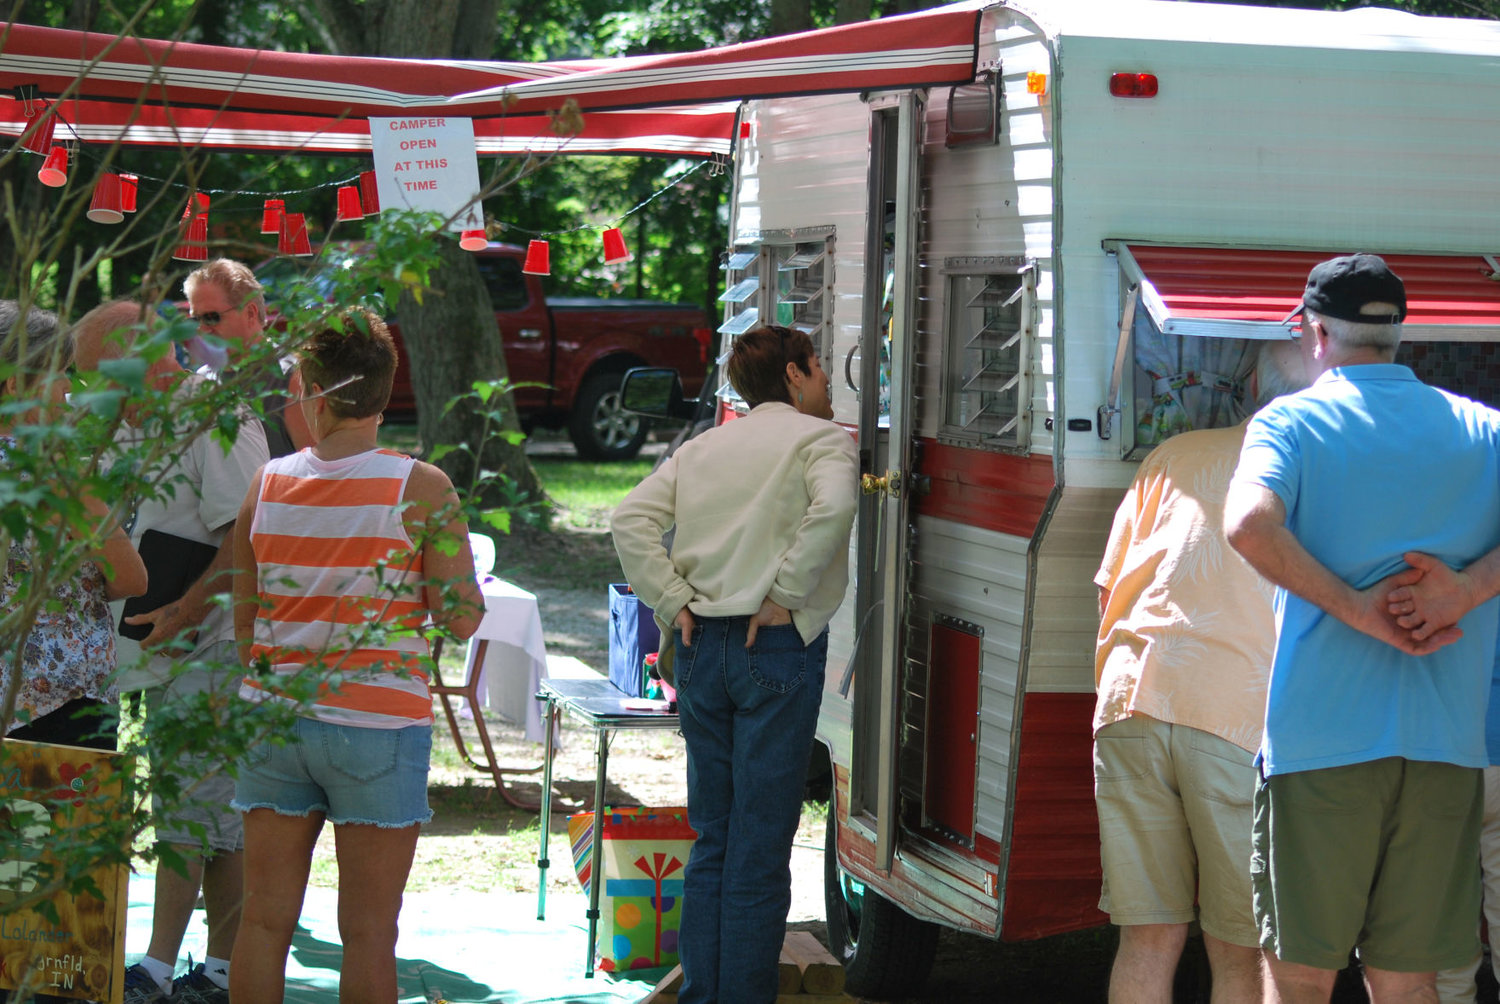 People look inside a vintage trailer owned by Kevin and Brenda Burk of Greenfield Saturday at an open house for the Mid-Central Indiana Vintage Camper Rally at KOA Campgrounds. The rally featured retro trailers decorated in a paradise theme.